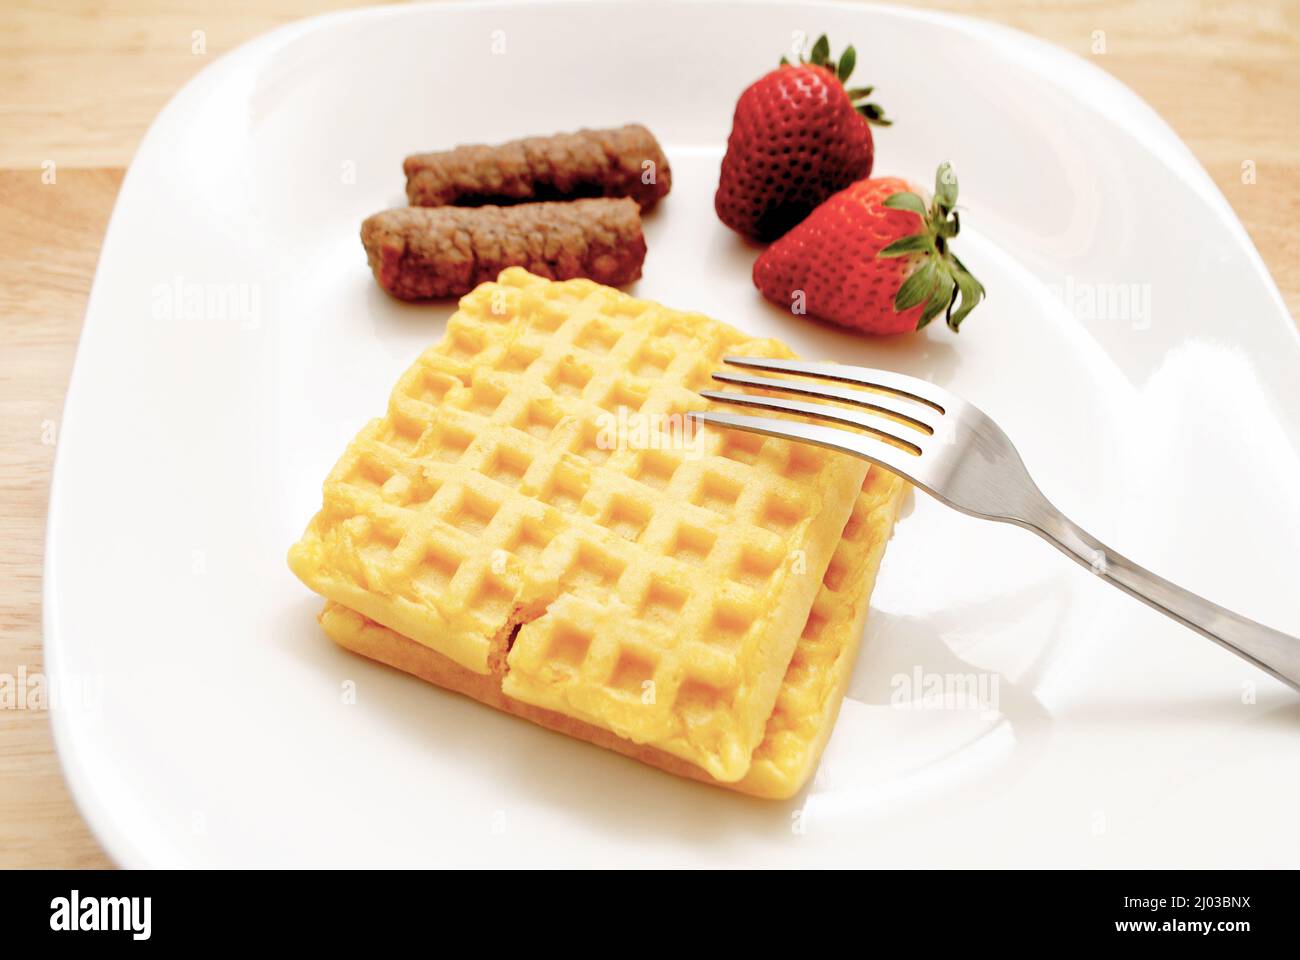 Waffles and Two Pork Sausage Links on a White Plate with Fresh Strawberries Stock Photo